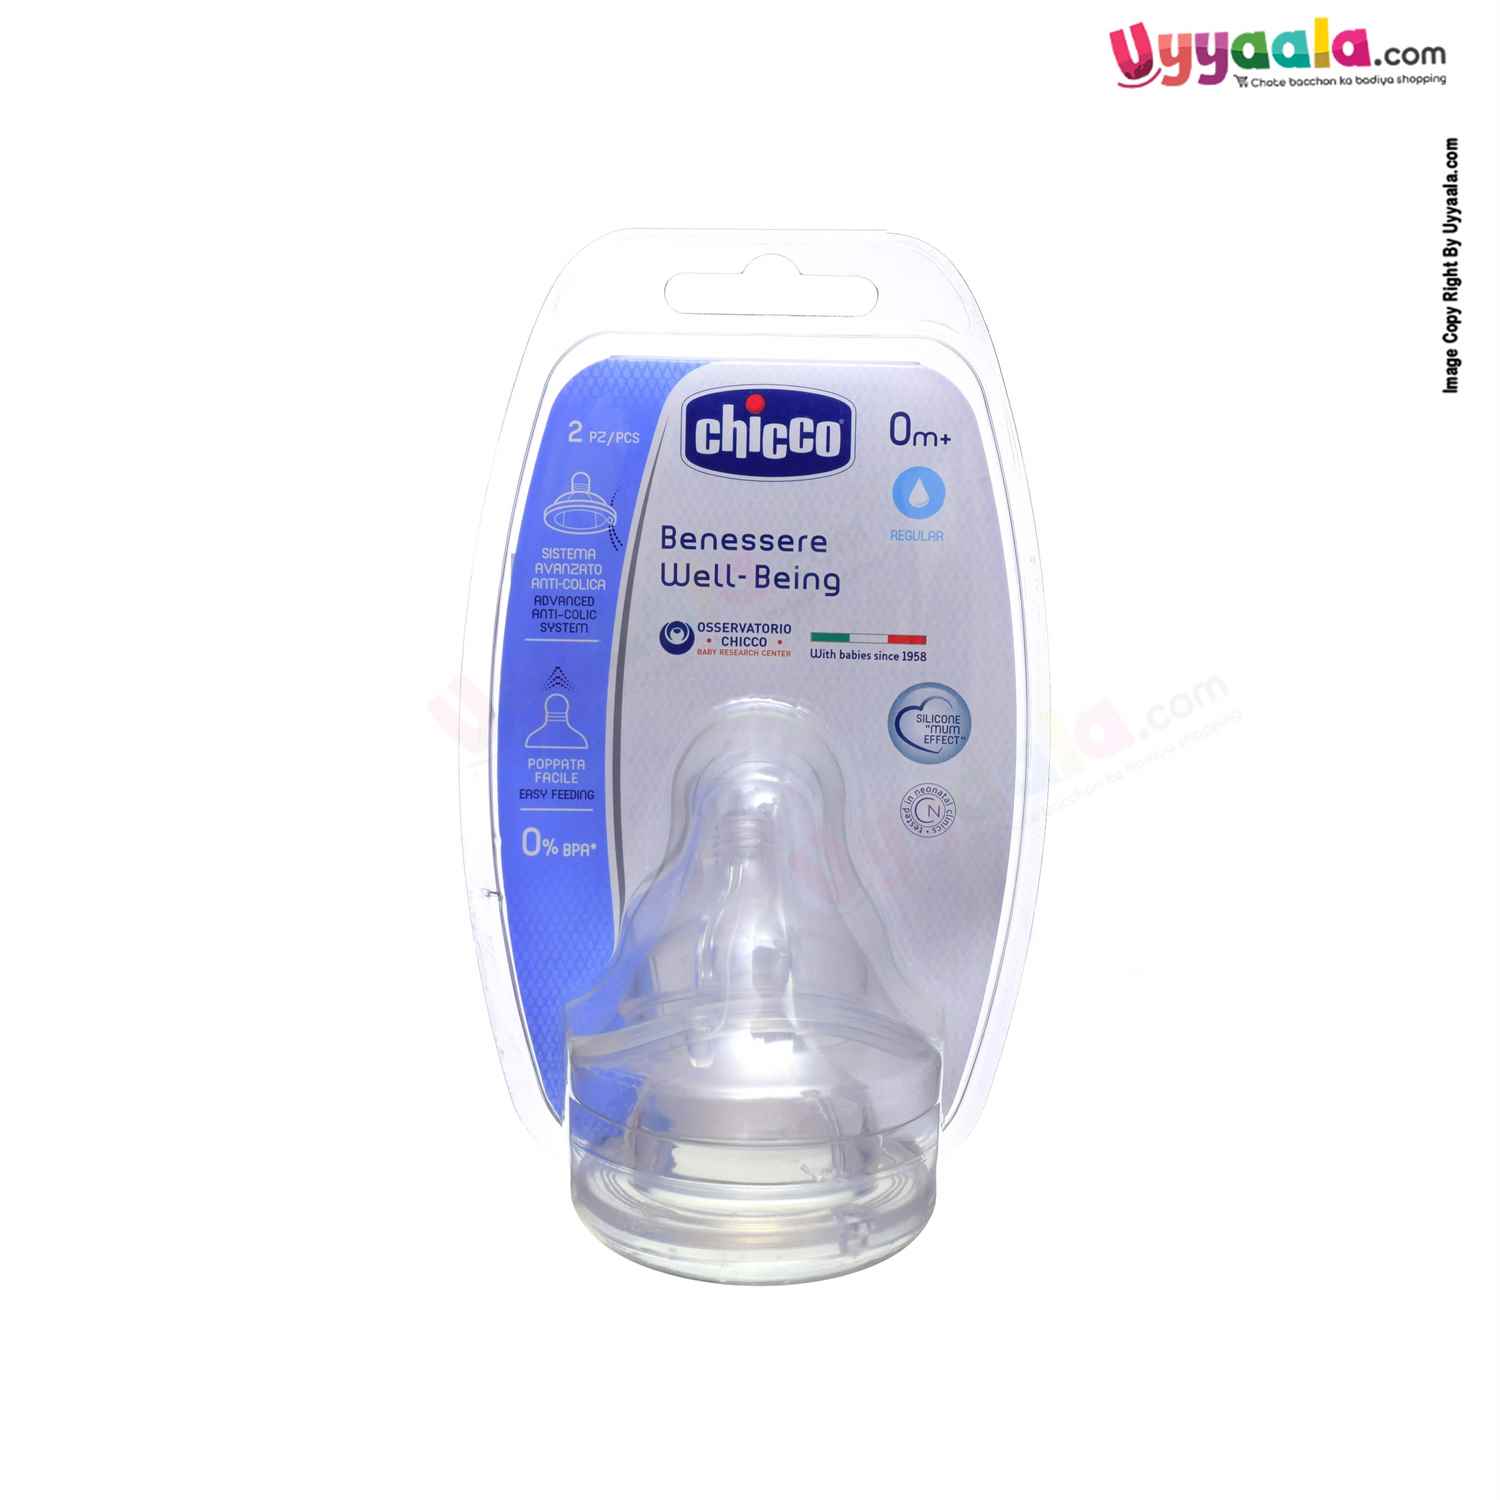 CHICCO Regular flow well being silicon teat, 2pcs - 0+m